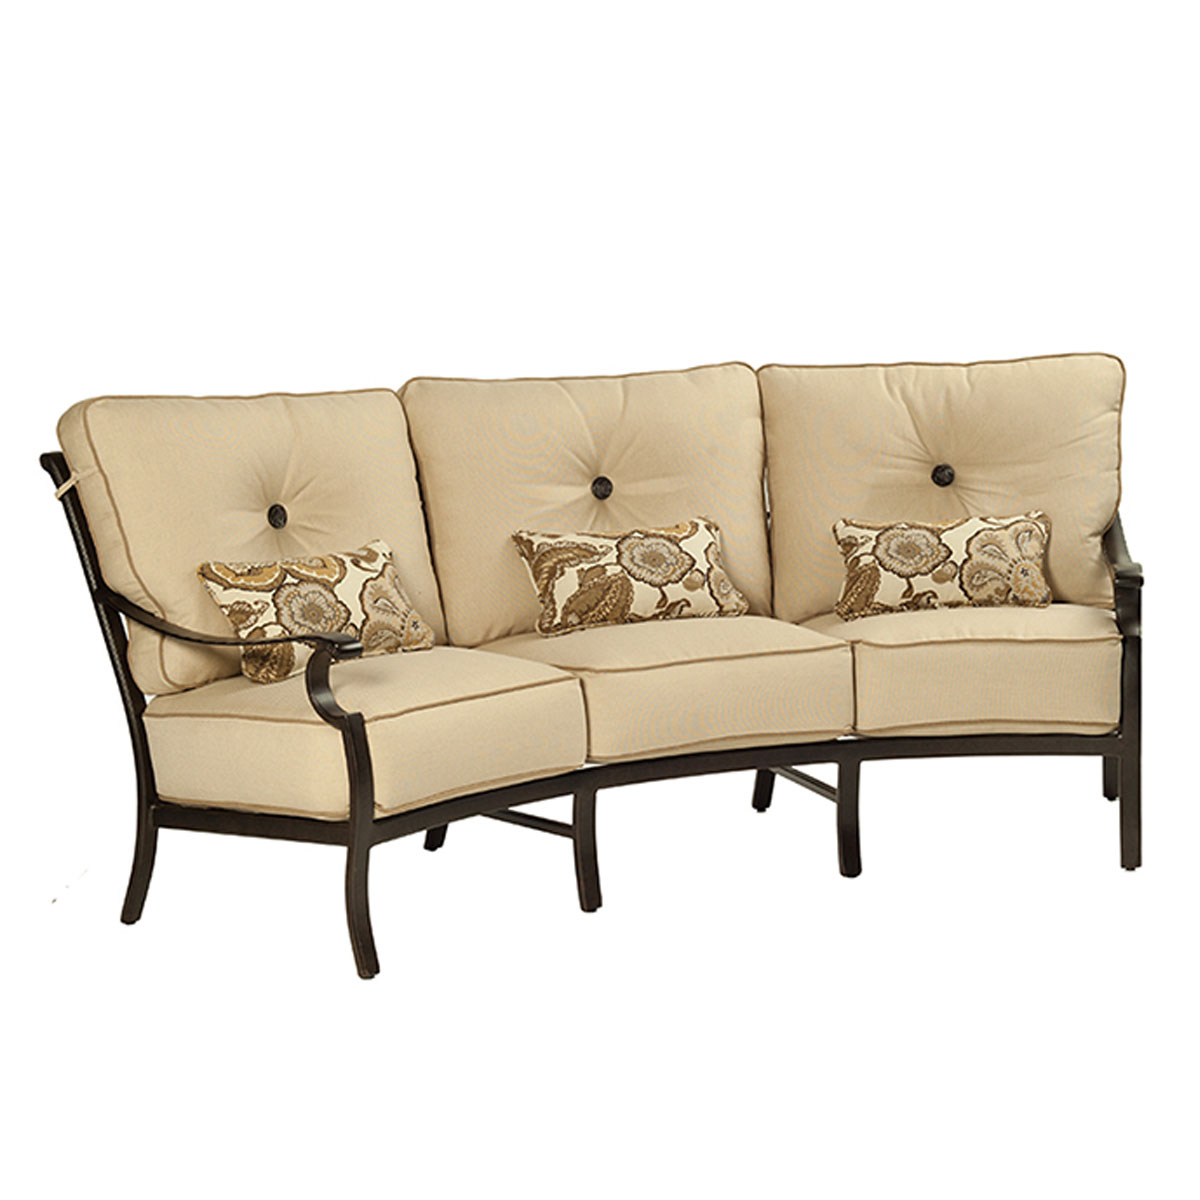 Castelle Monterey High Back Cushioned Crescent Sofa